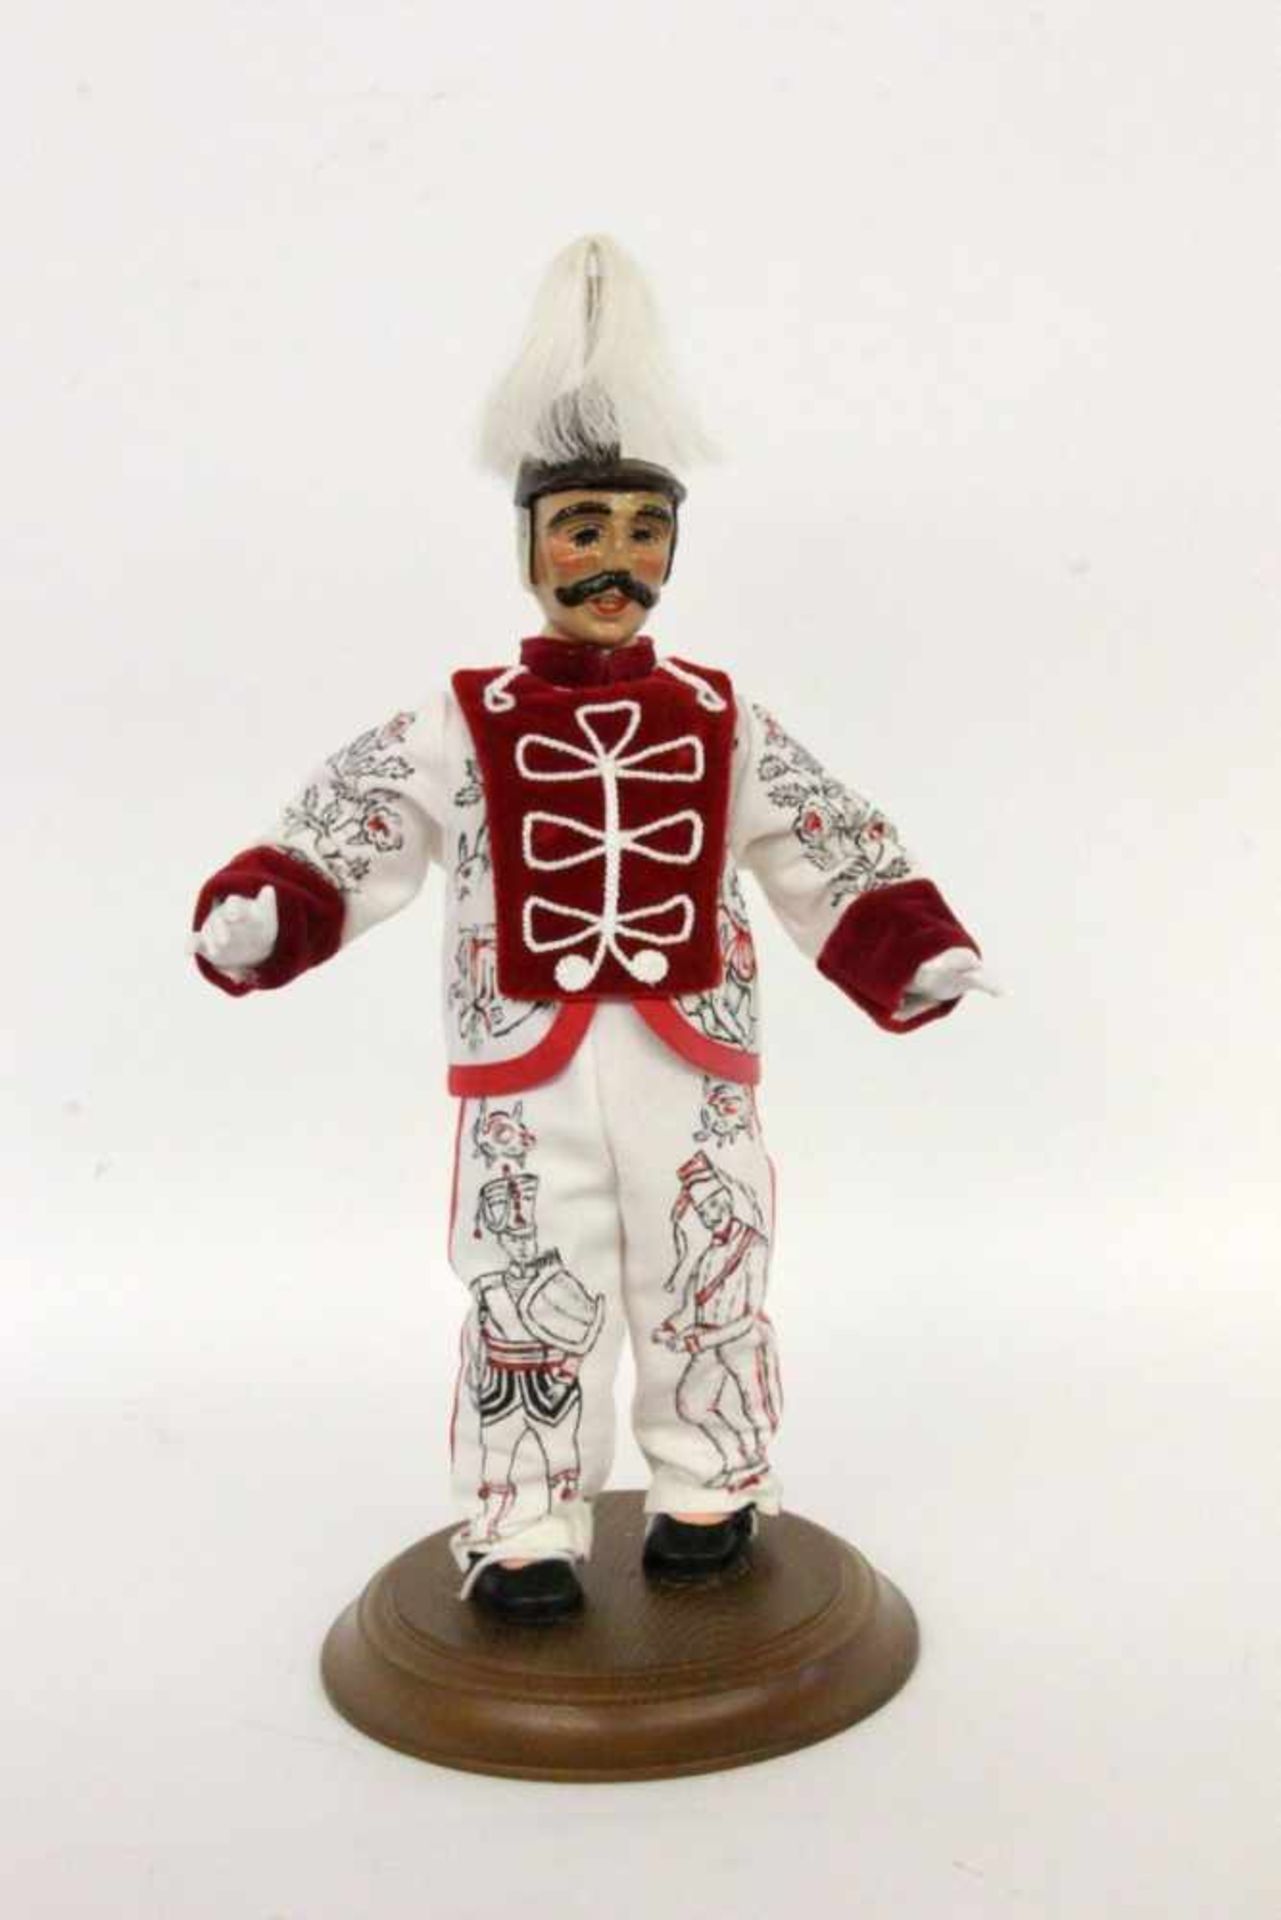 ''AN ALEMANNIC FASNET / CARNIVAL DOLL Wood with traditional clothing. 45 cm highKeywords: